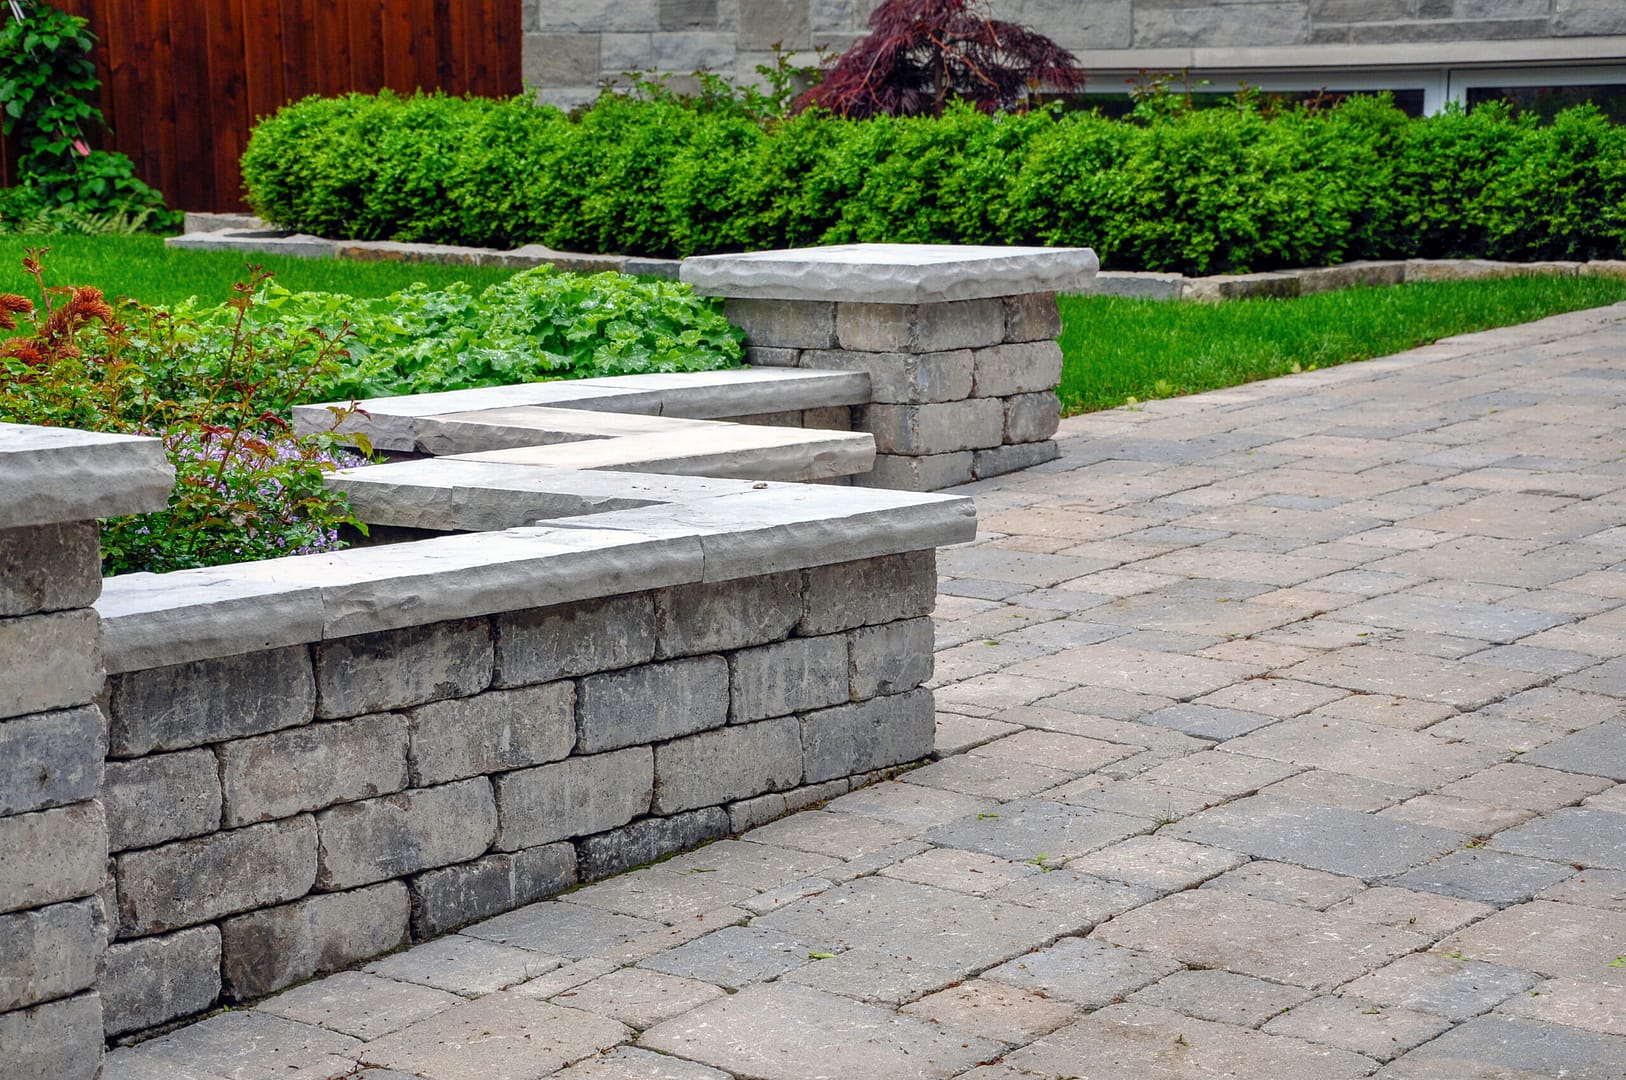 An elegant seat wall featuring sturdy pillars and natural stone coping, defining a charming tumbled paver driveway, creating a picturesque landscaping focal point.